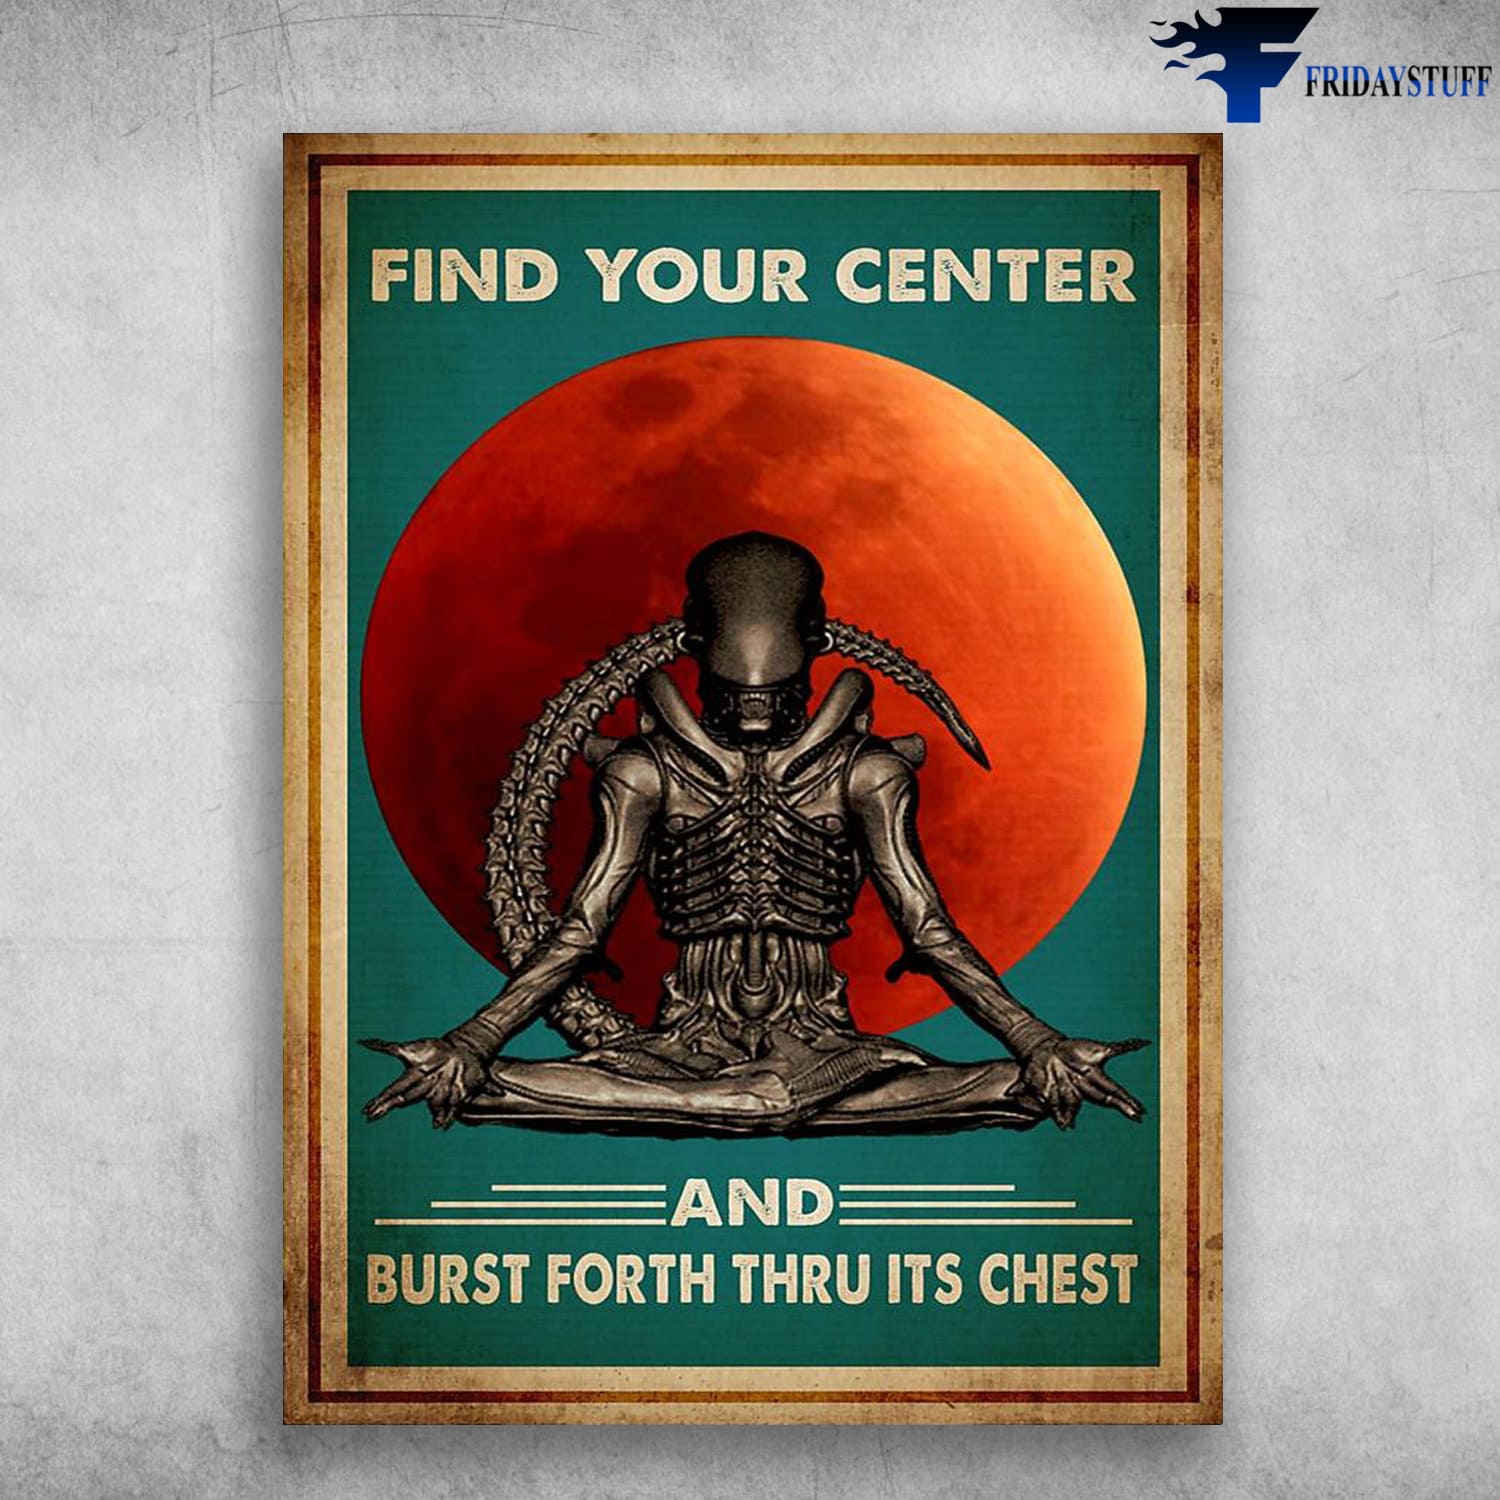 Yoga Poster, Alien Yoga, Find Your Center, And Brust Forth Thru Its Chest